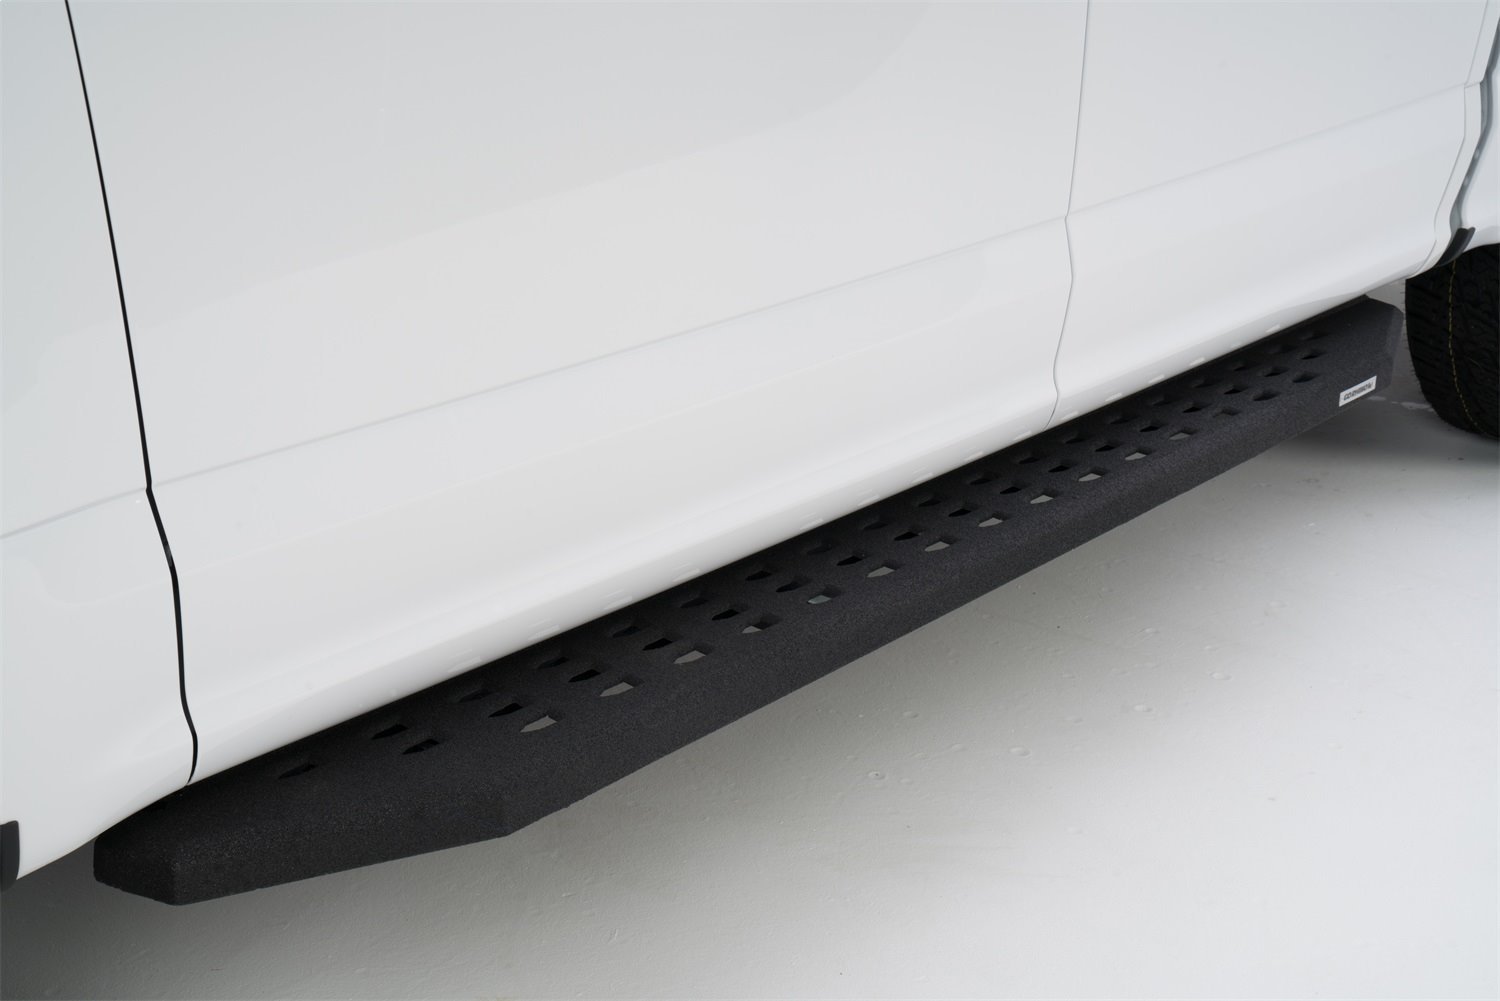 RB20 Running boards for 1999-2016 Ford F250